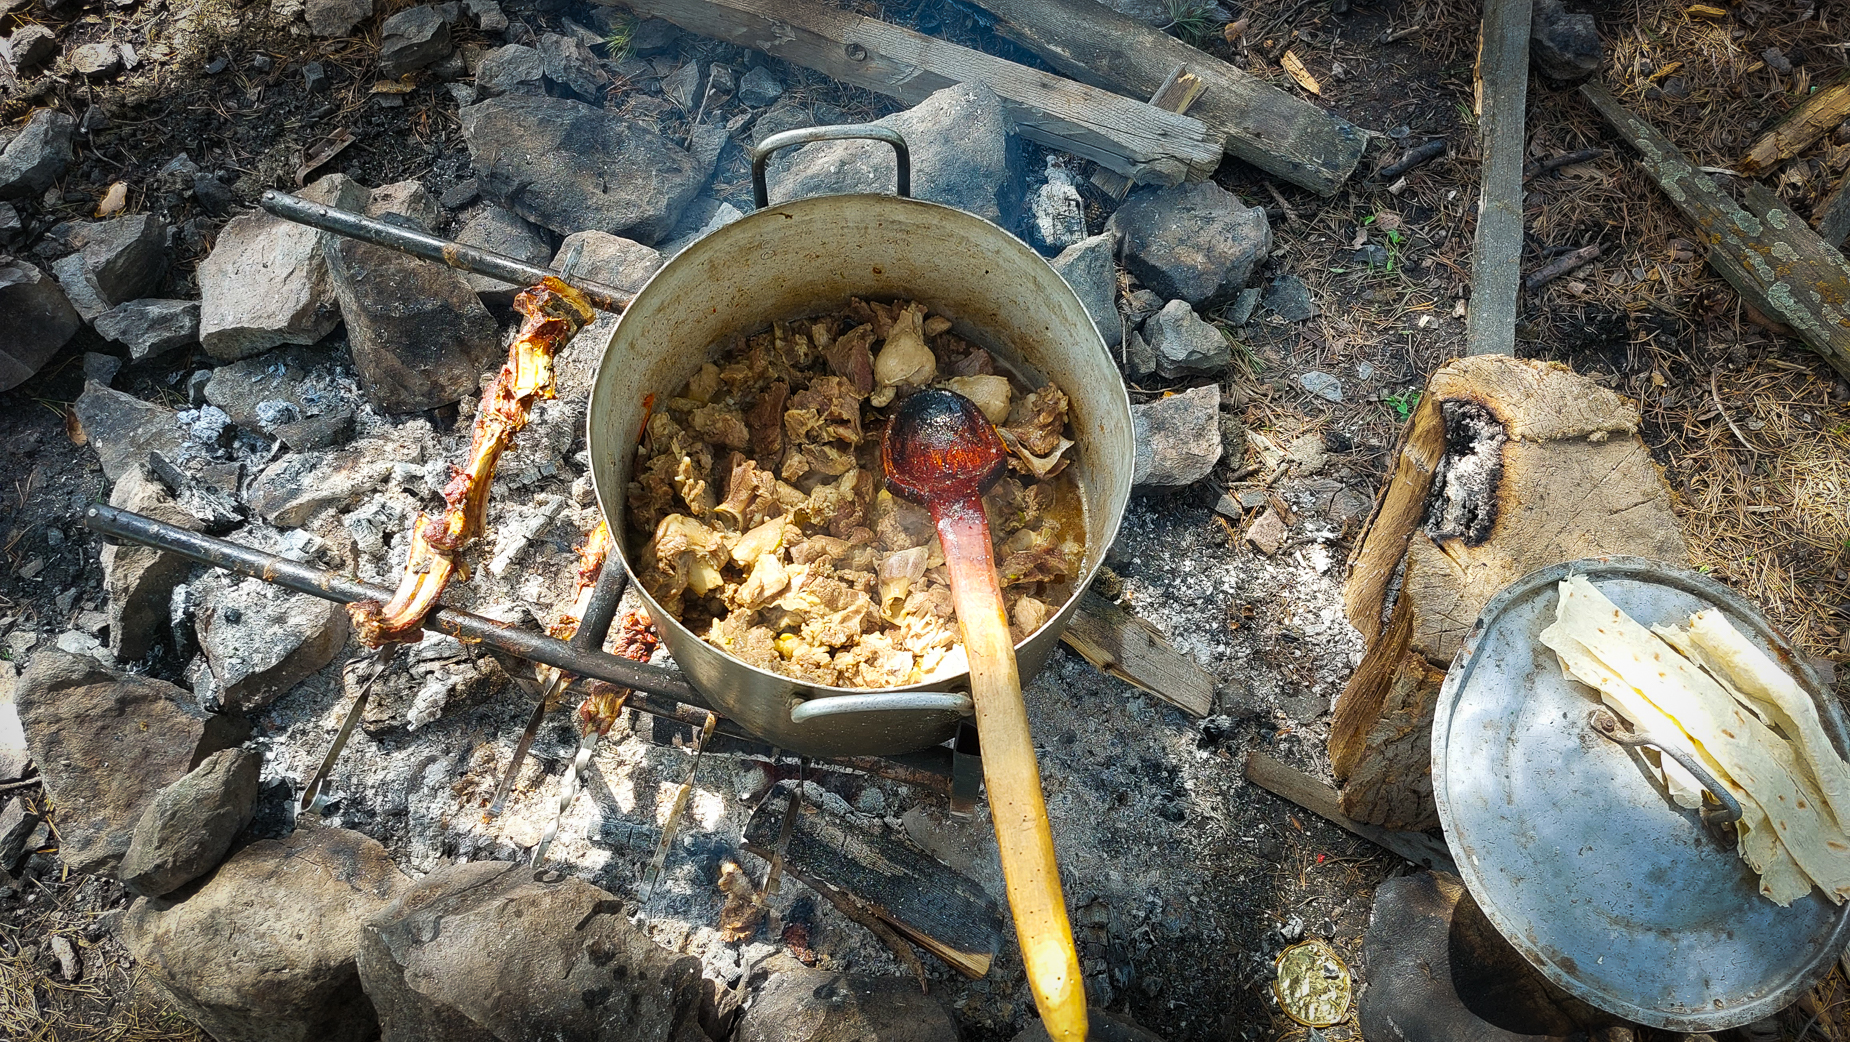 <span  class="uc_style_uc_tiles_grid_image_elementor_uc_items_attribute_title" style="color:#ffffff;">solide Georgian cooking, over the camp fire, yummy!</span>